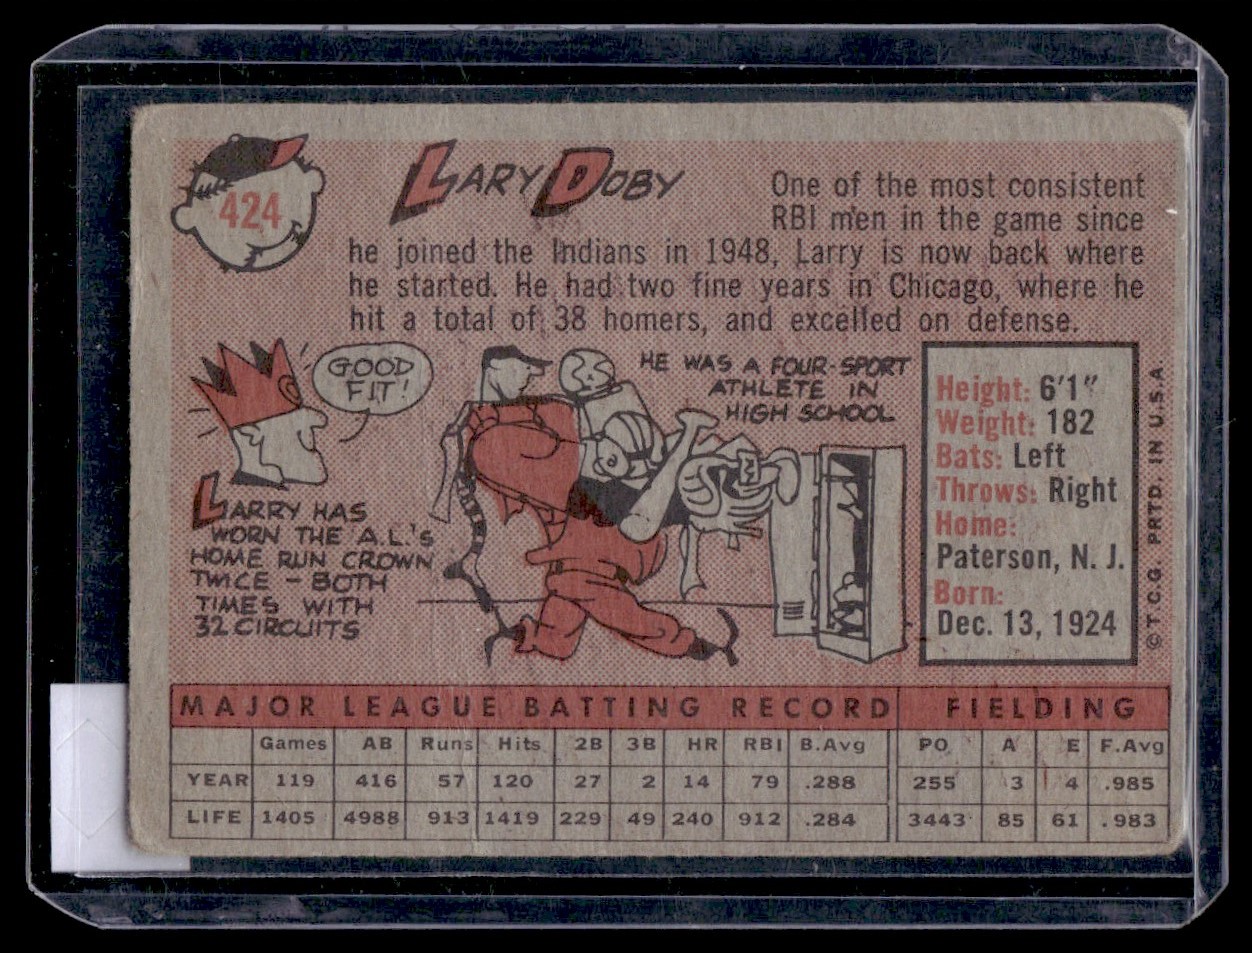 1958 Topps Larry Doby #424 card back image